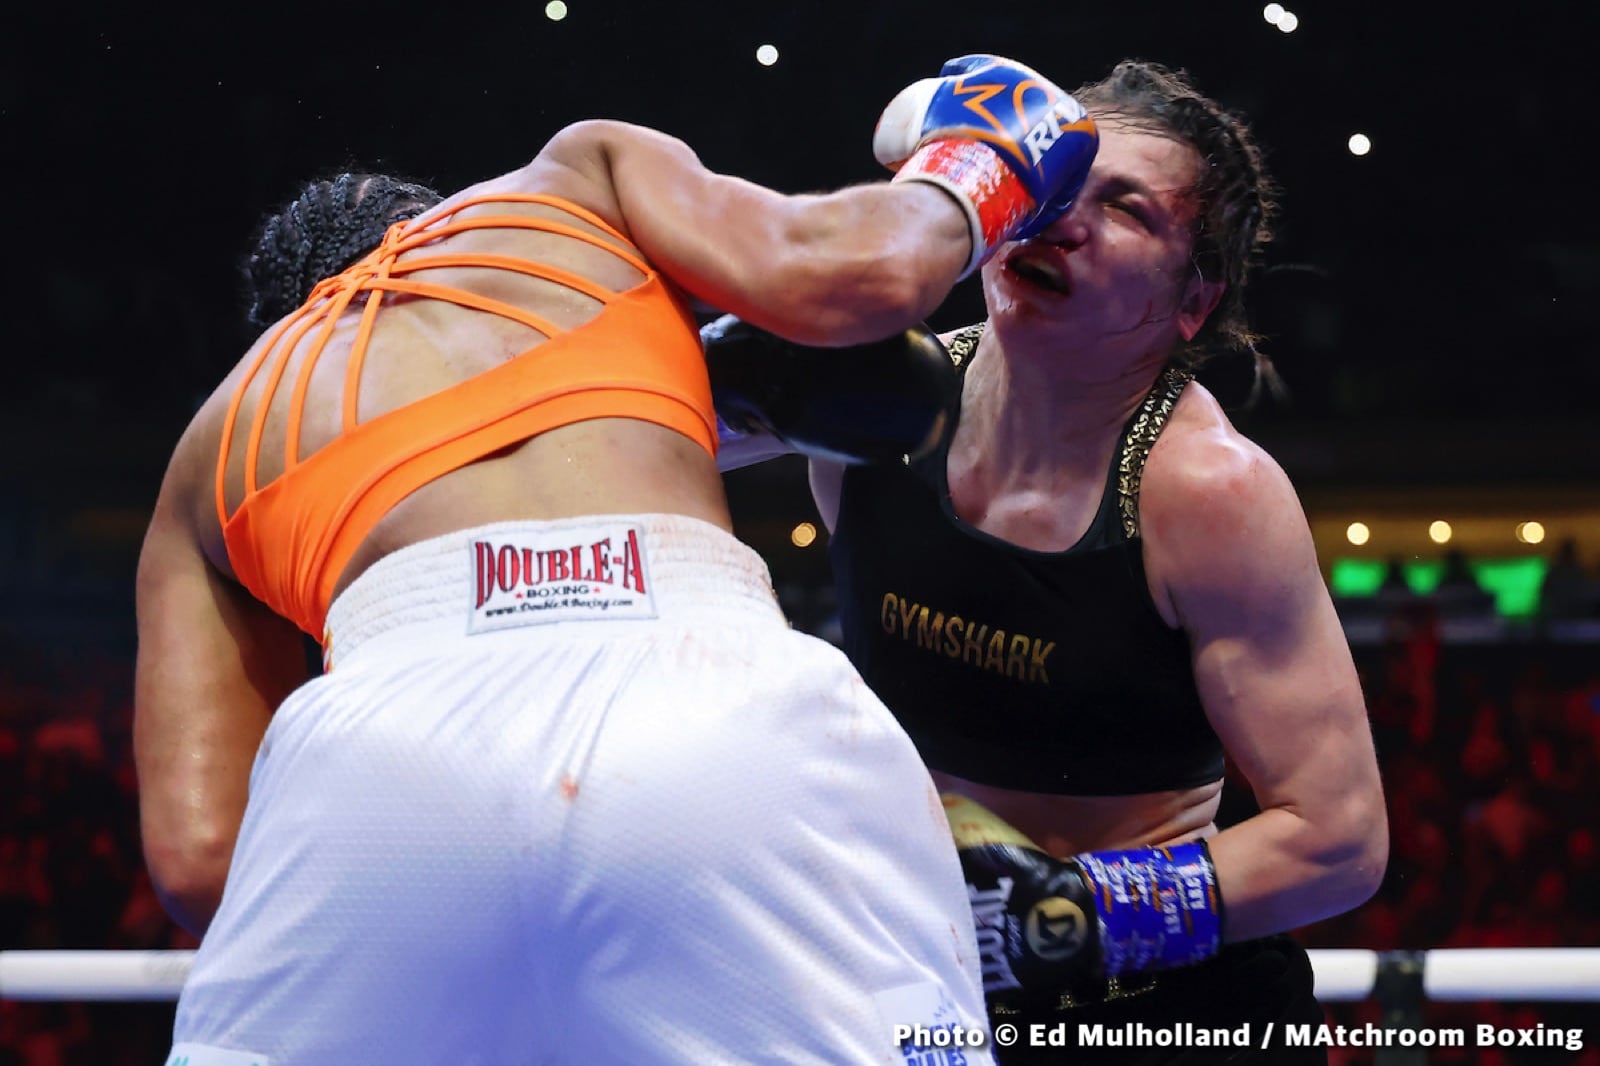 Katie Taylor Pips Amanda Serrano In An Instant Classic And To No Surprise There Is Instant Talk Of A Rematch